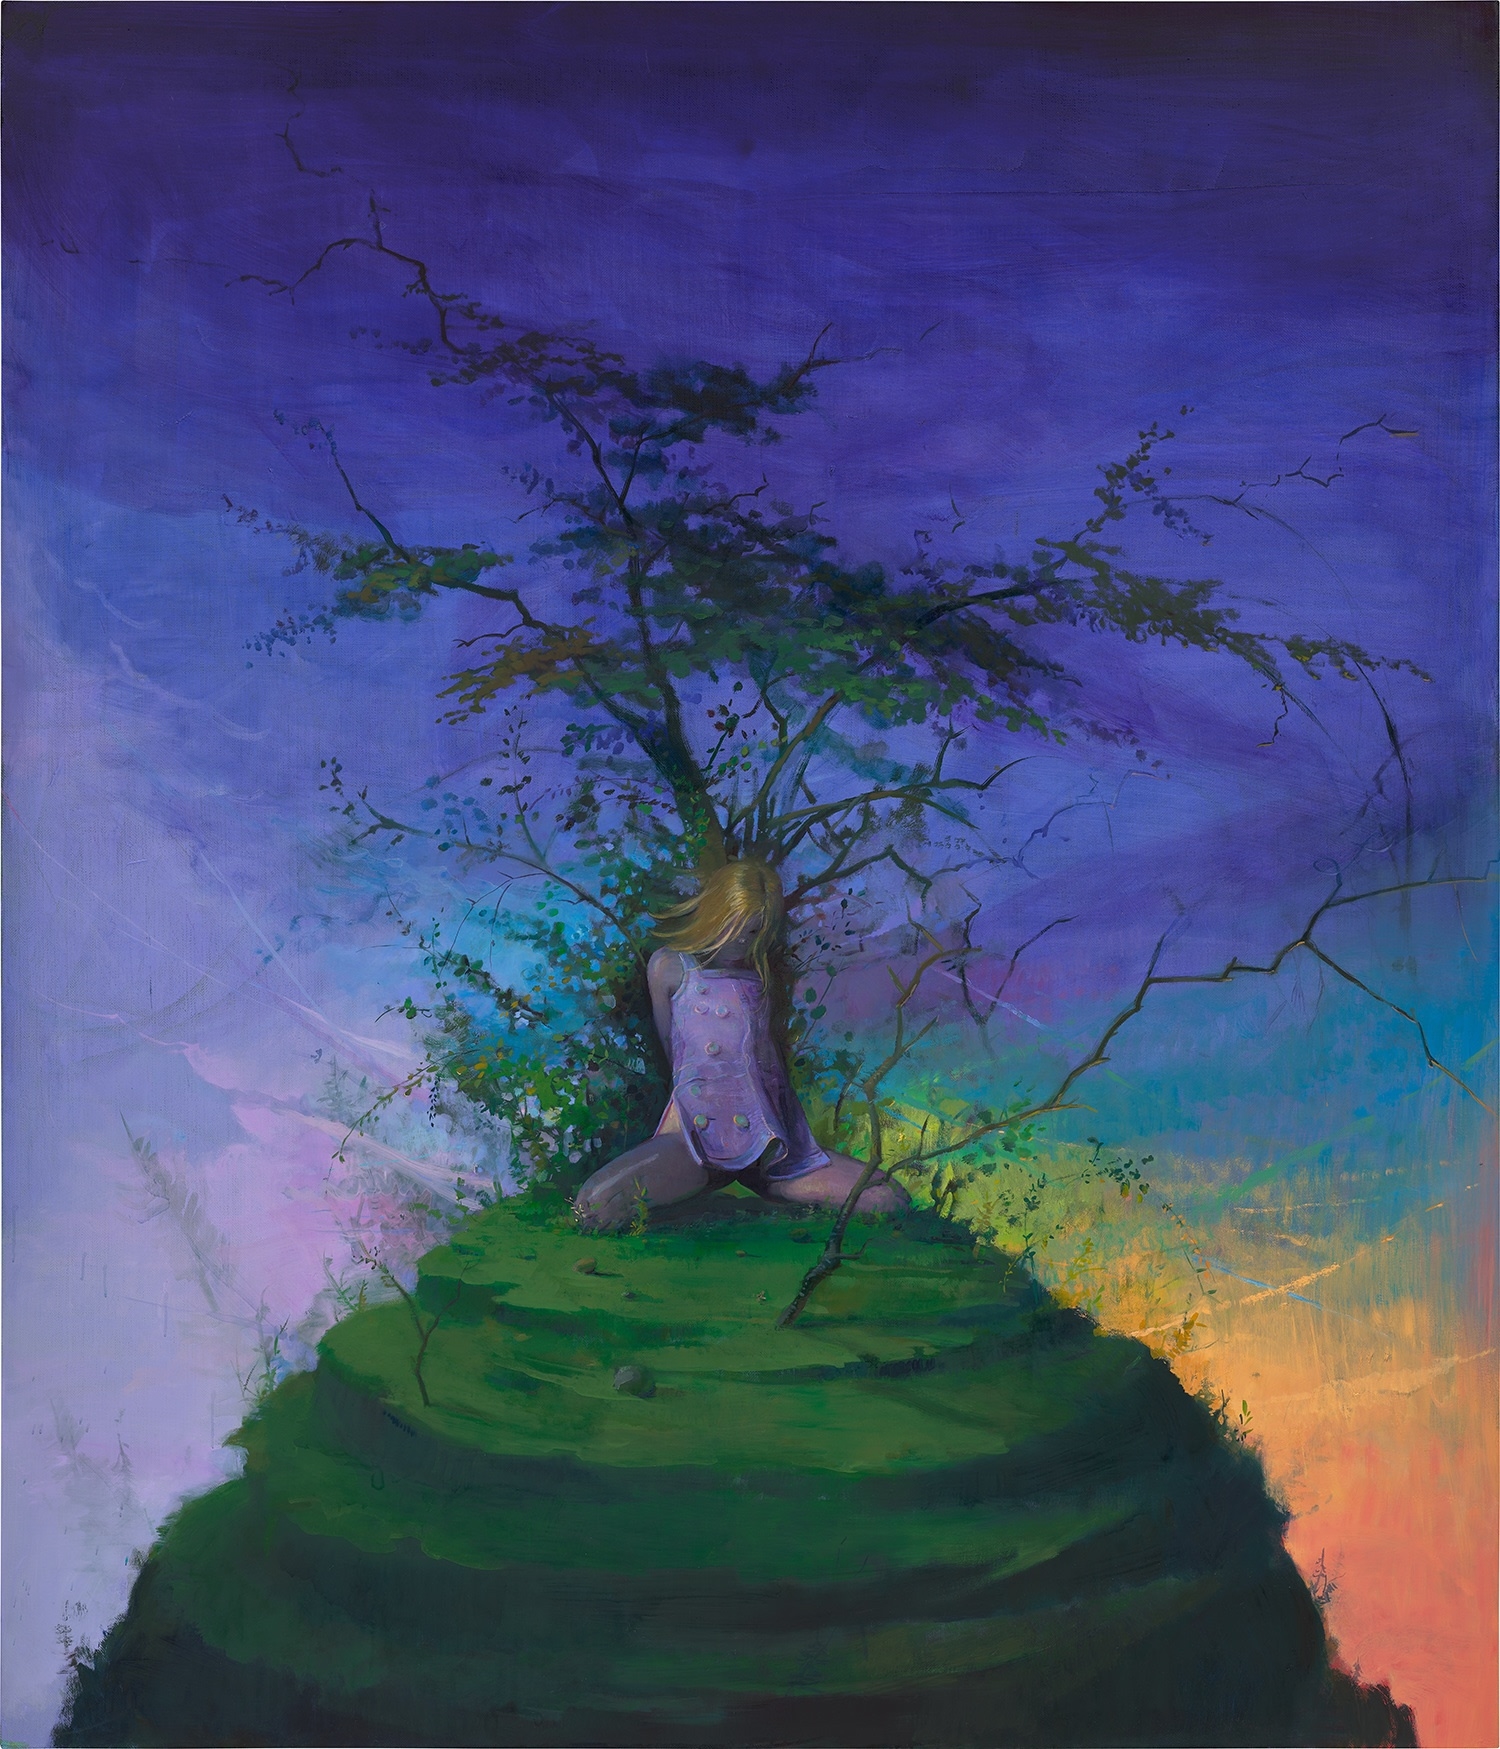 Artwork by Lisa Yuskavage, The Mound, Made of oil on linen